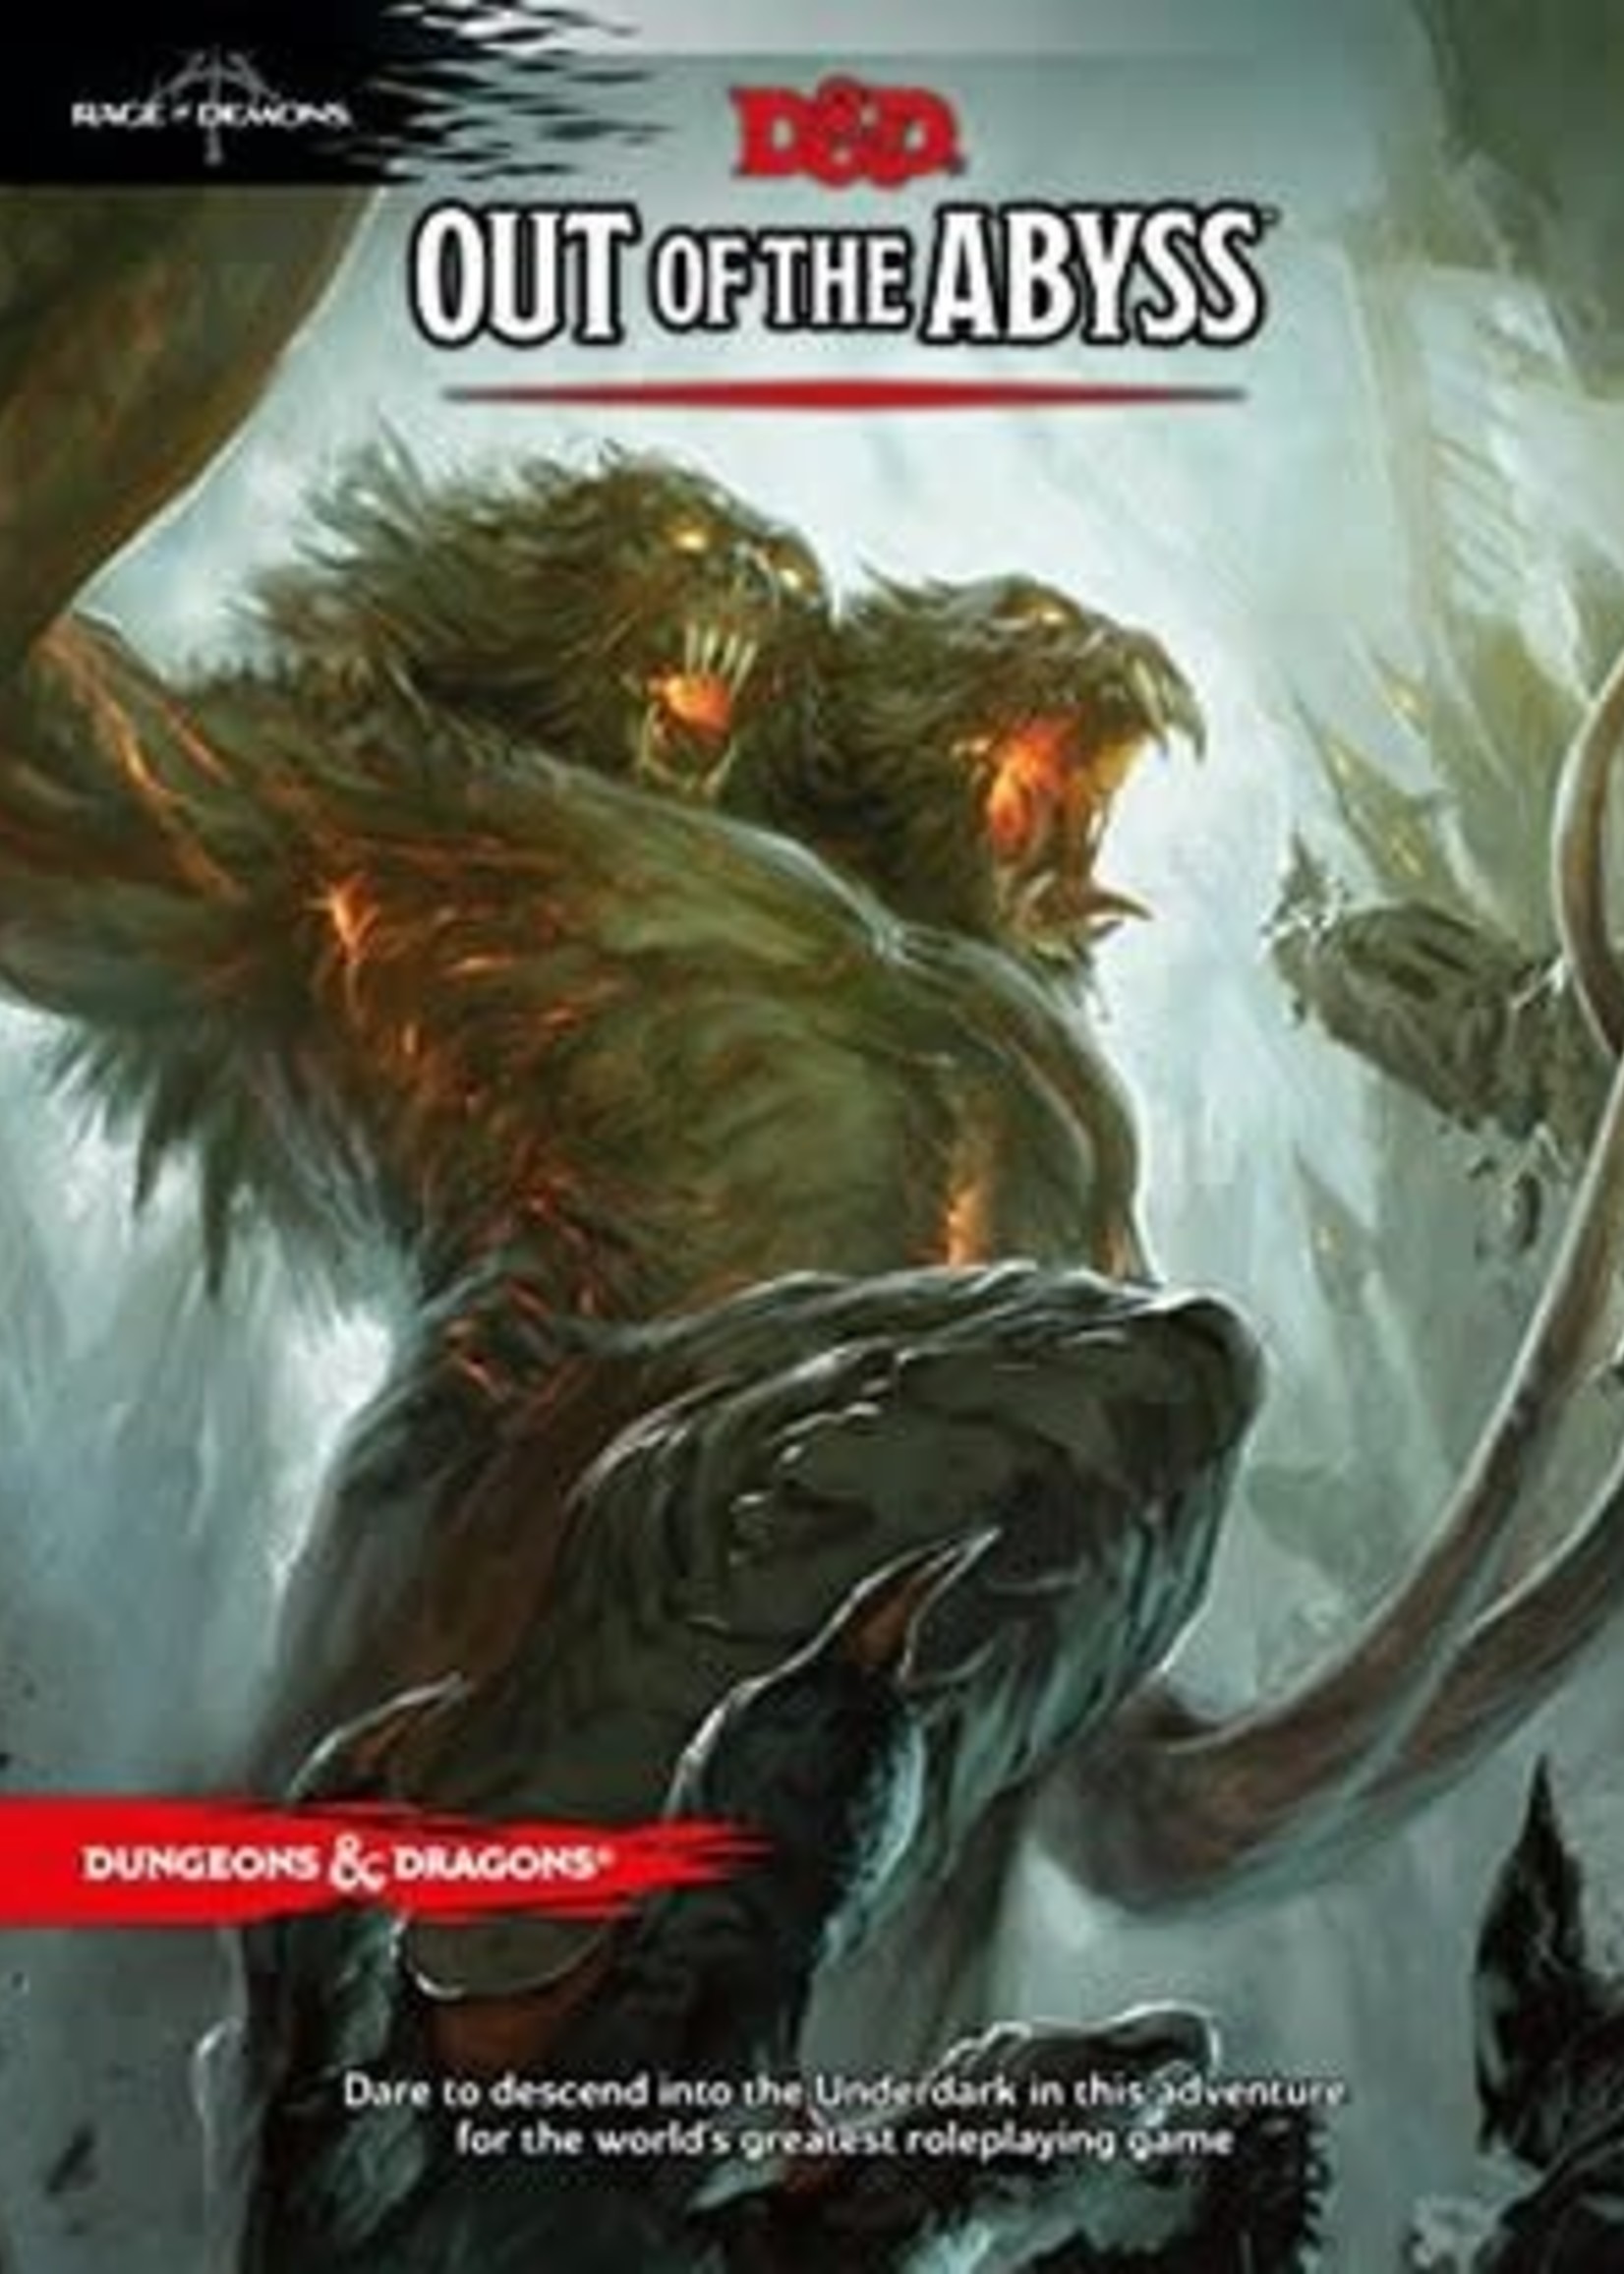 Out of the Abyss (Dungeons & Dragons, 5th Edition) by WotC